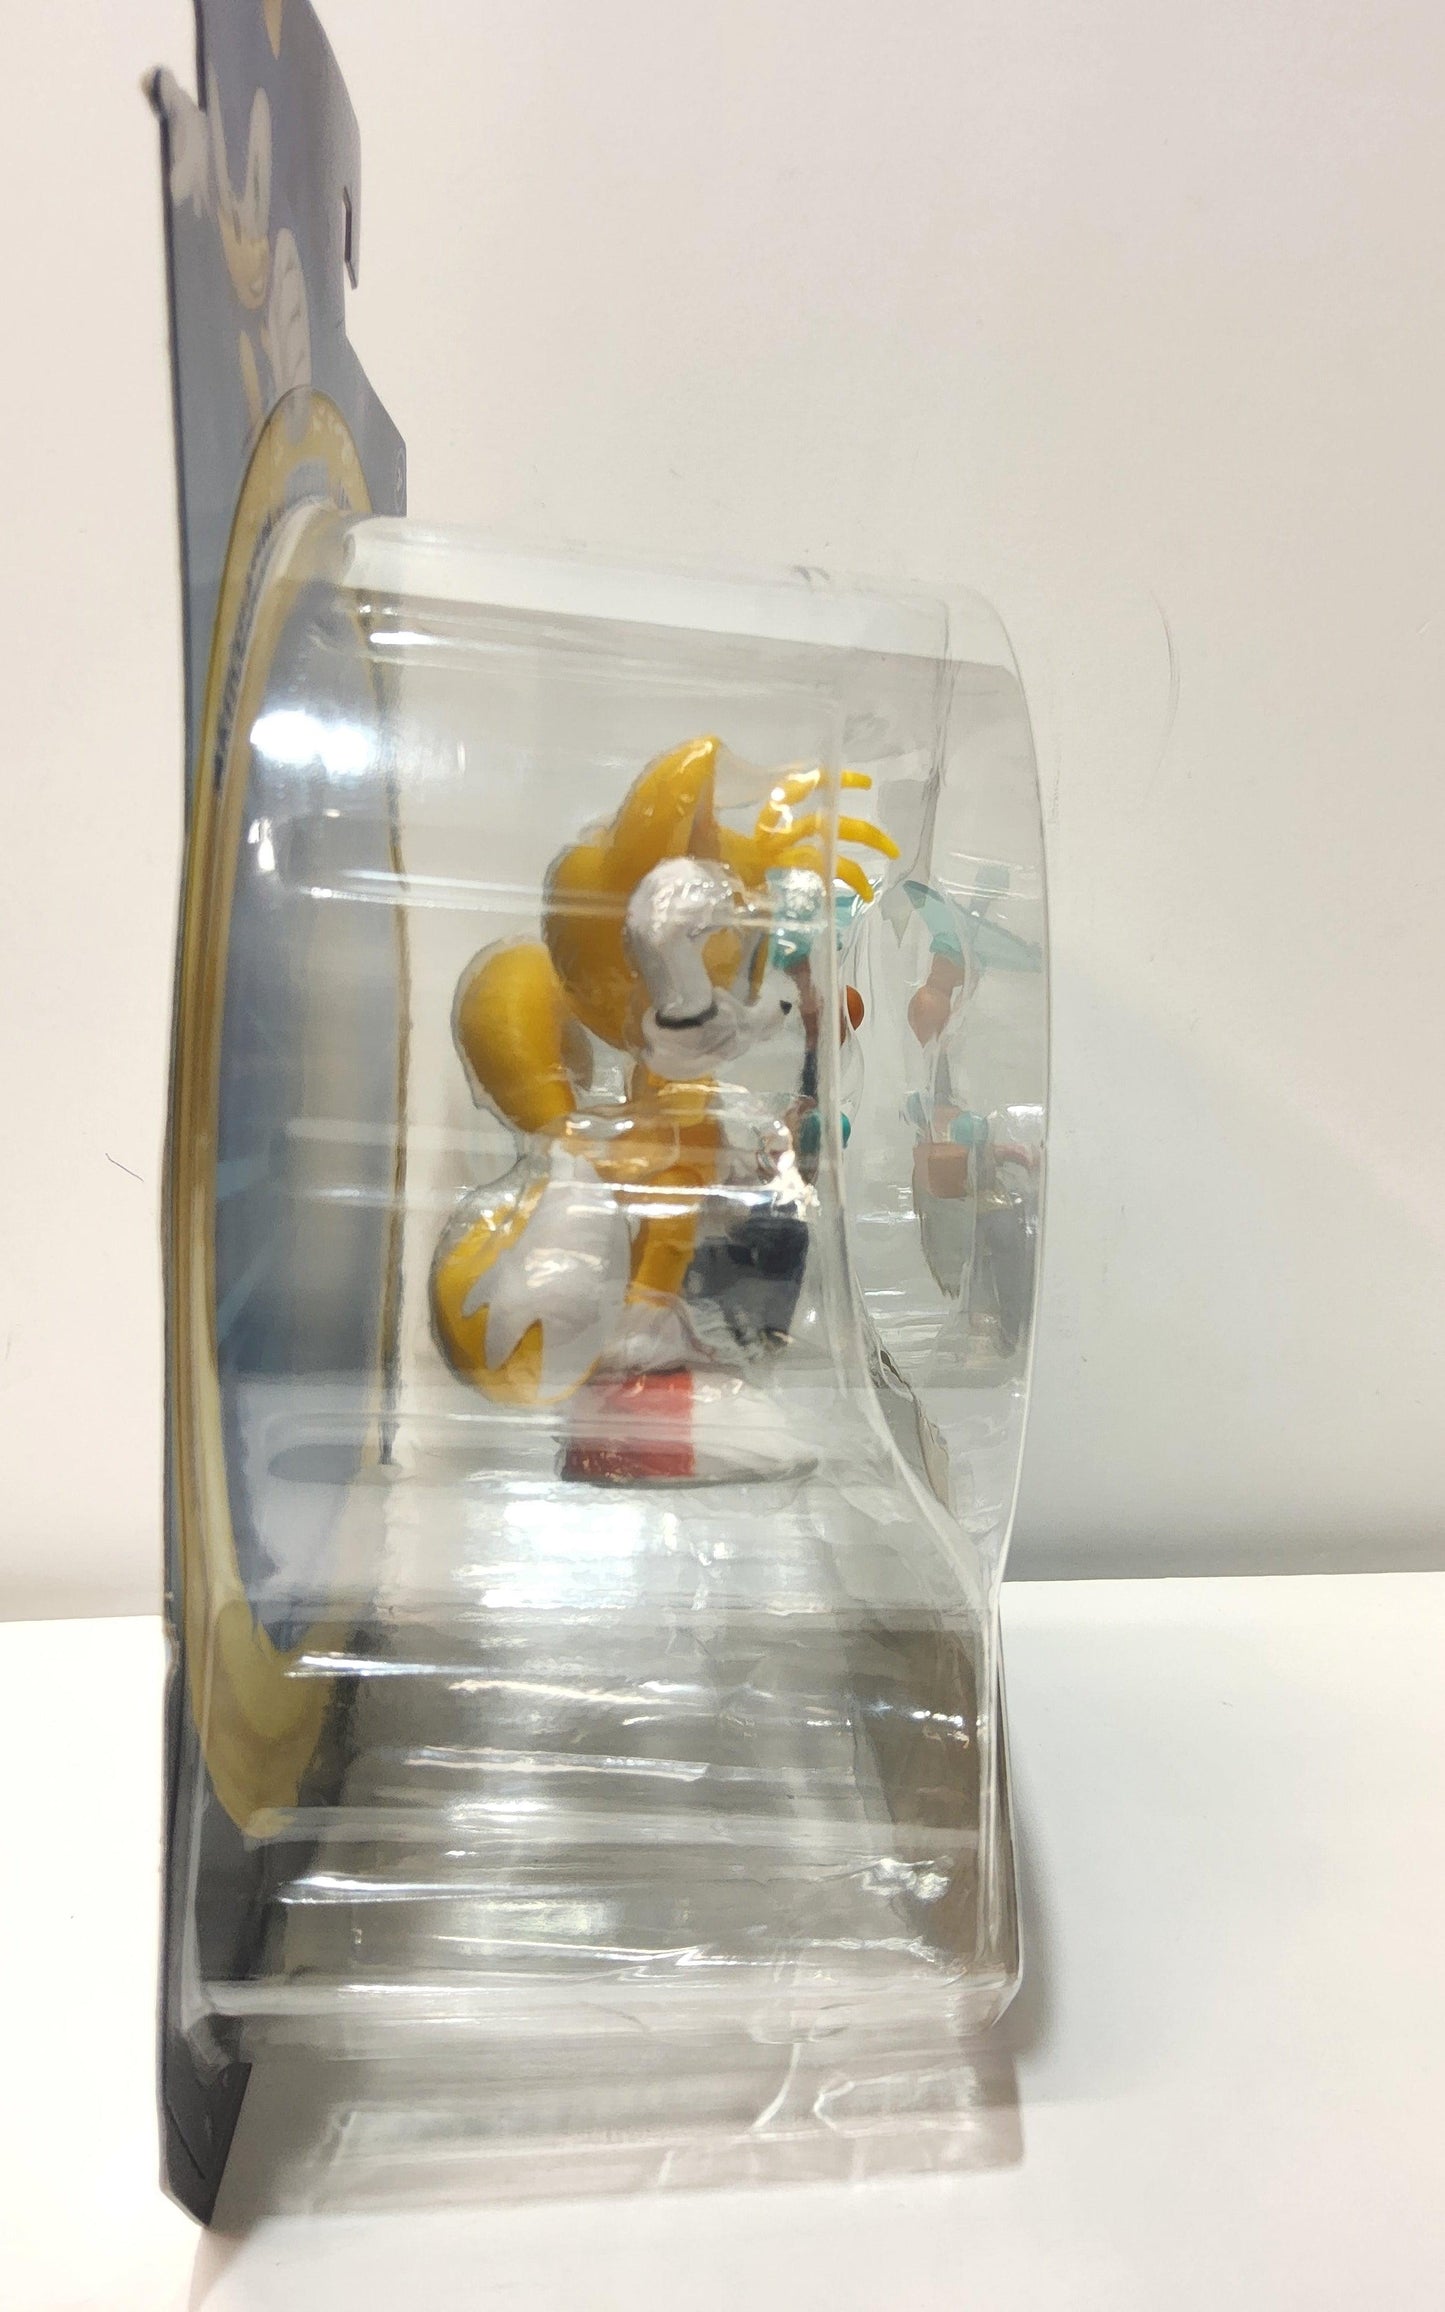 Sonic the Hedgehog Tails 4" With Miles Electric Device Action Figure - Logan's Toy Chest